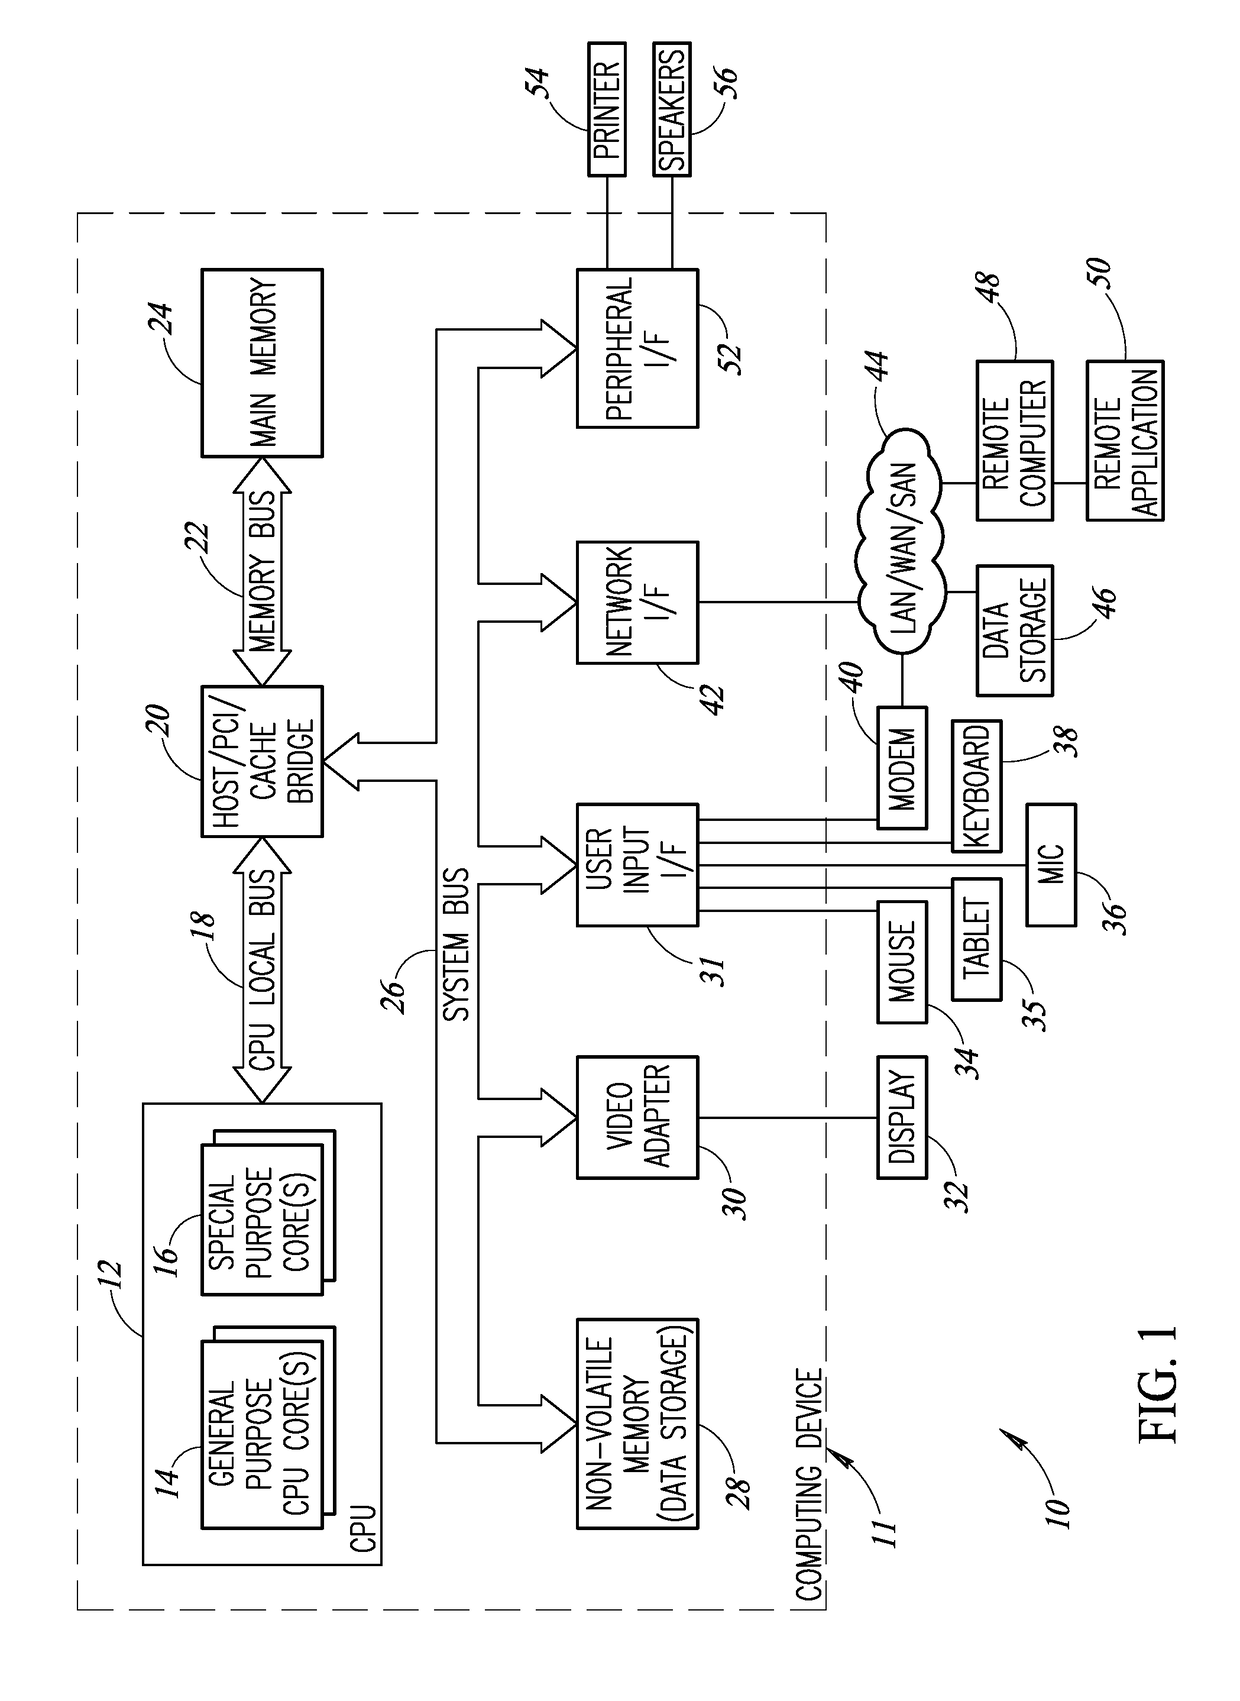 Neural Network Processor Incorporating Separate Control And Data Fabric